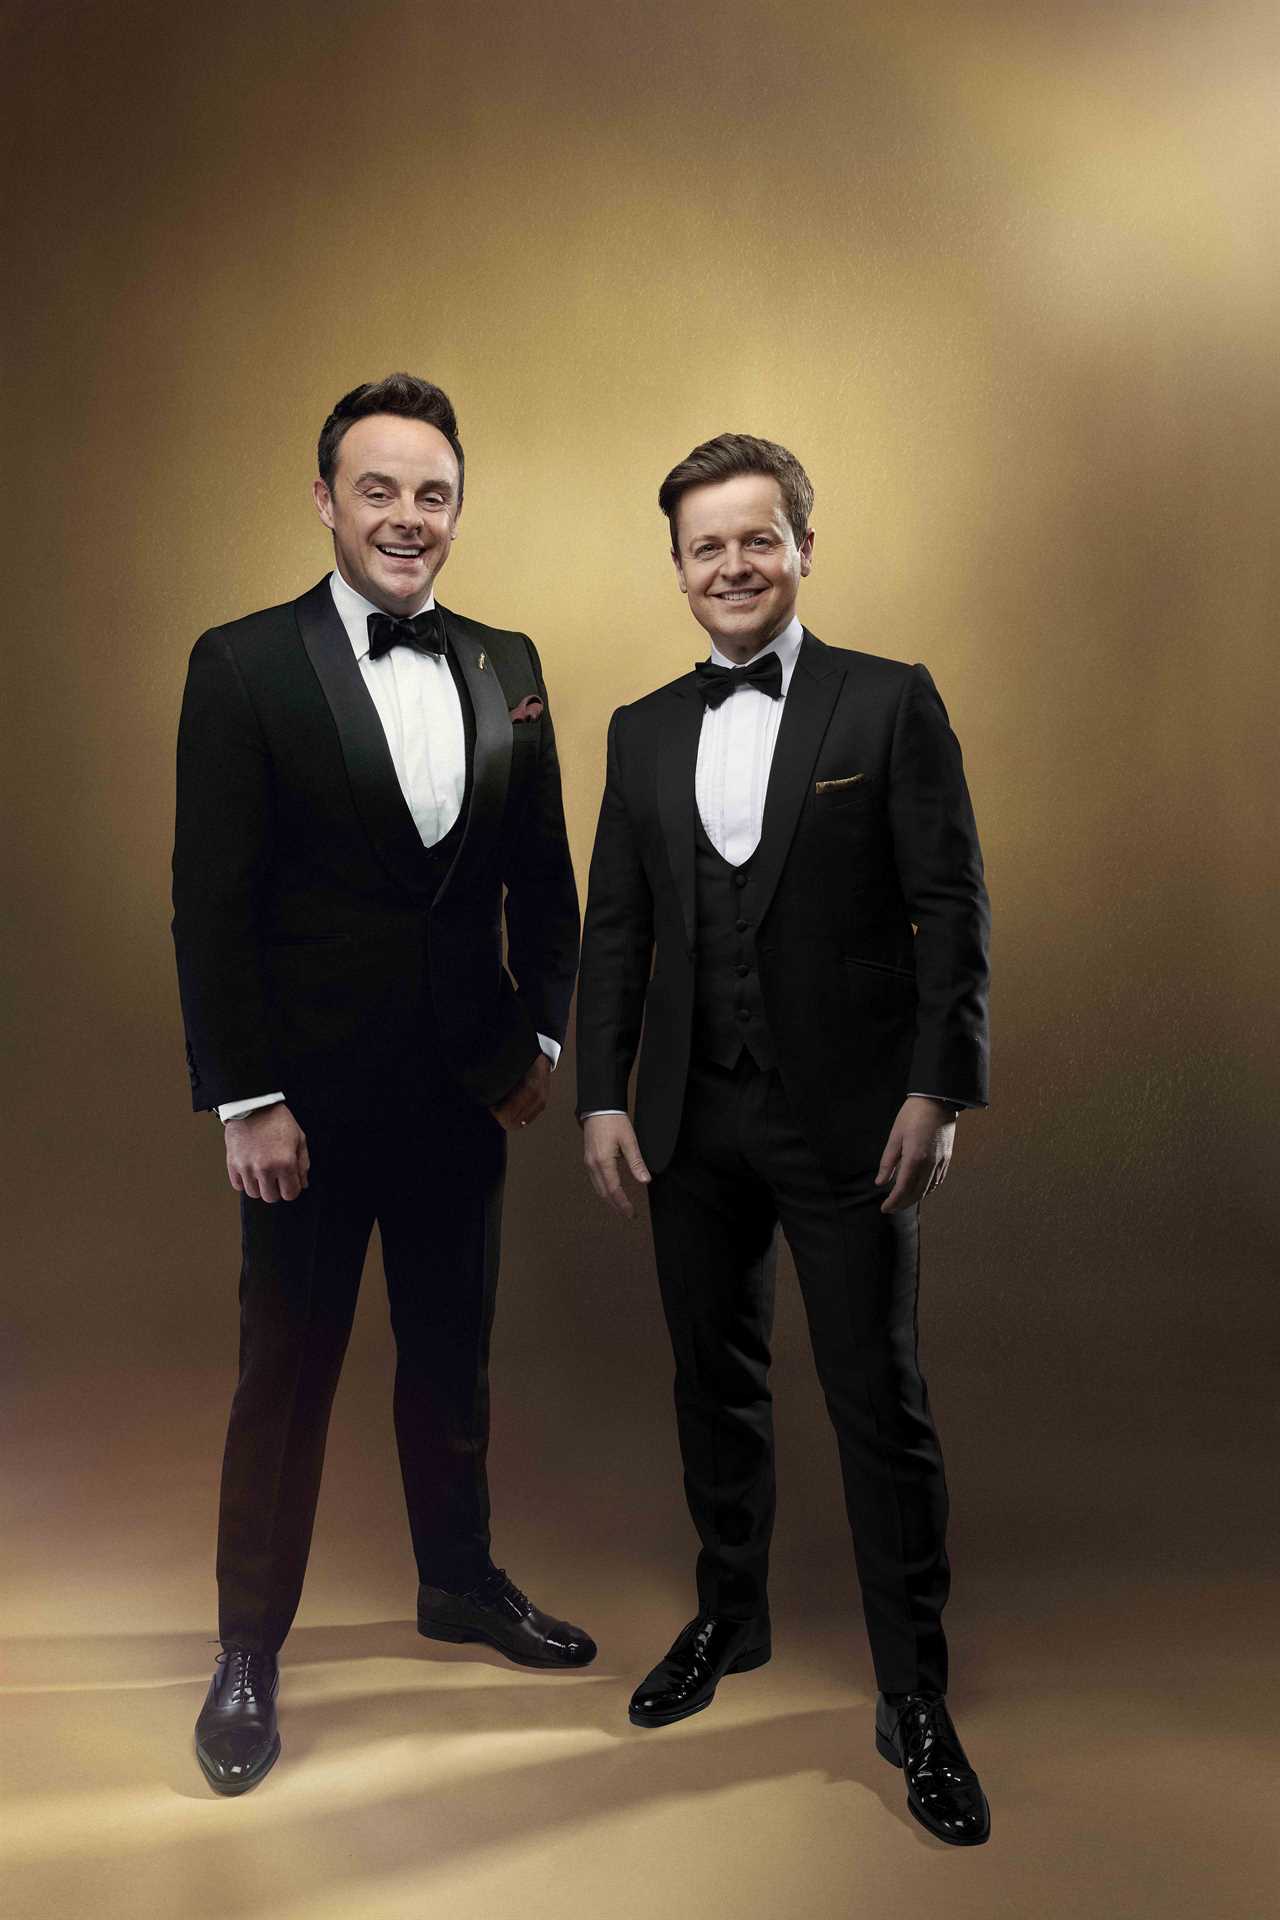 Ant and Dec reveal hilarious prank they played on the BGT judges as Bruno Tonioli joins the panel